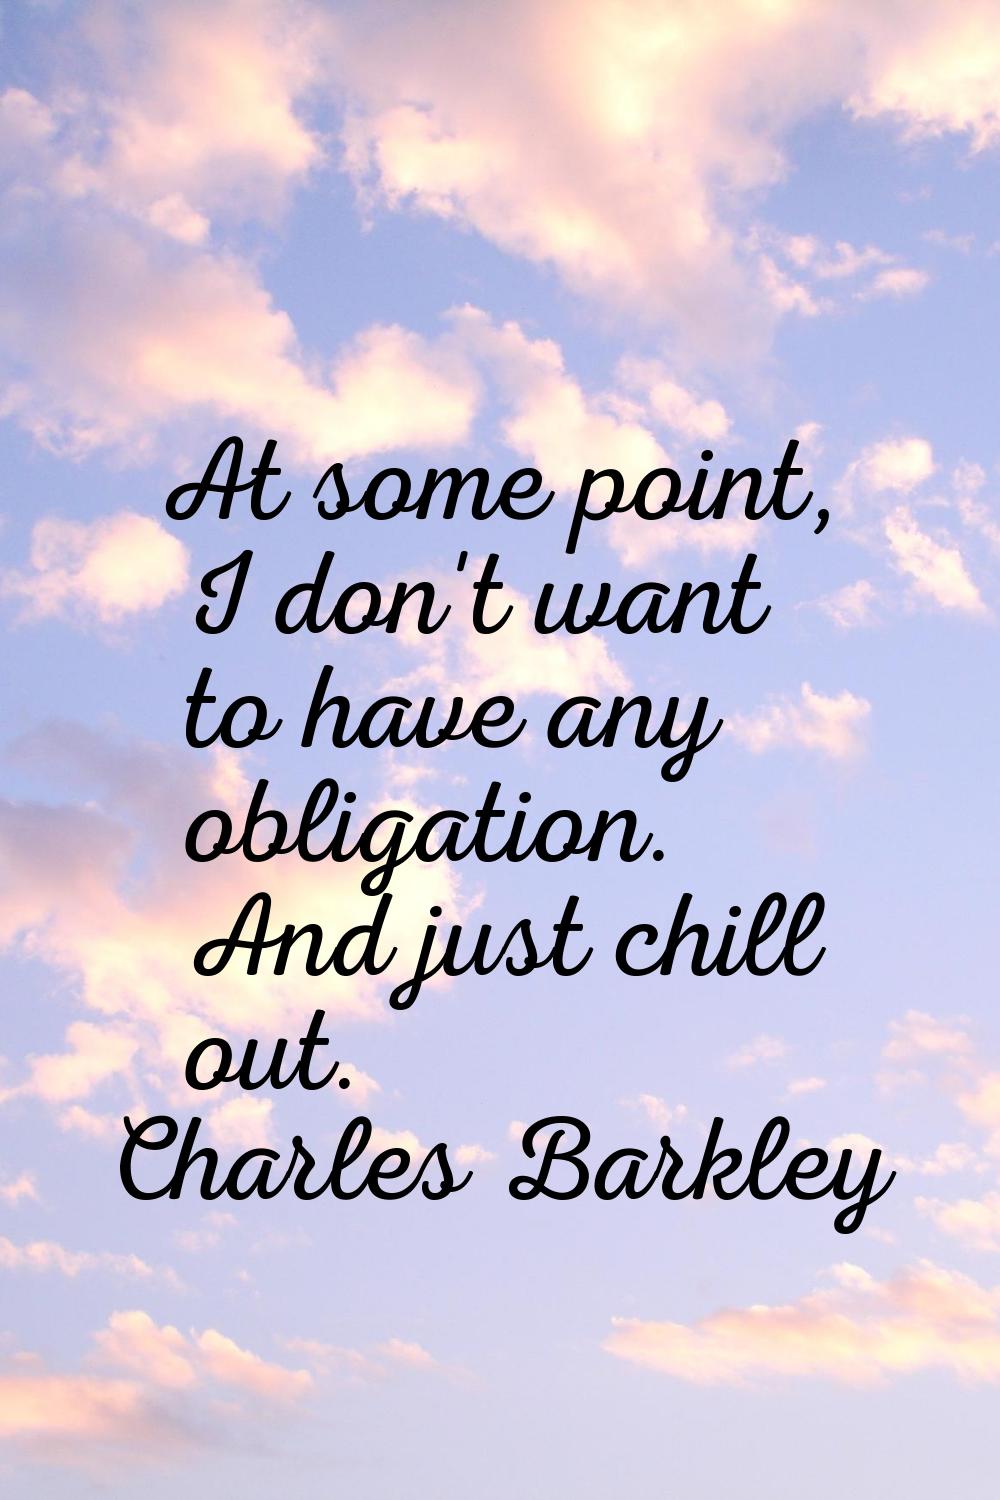 At some point, I don't want to have any obligation. And just chill out.